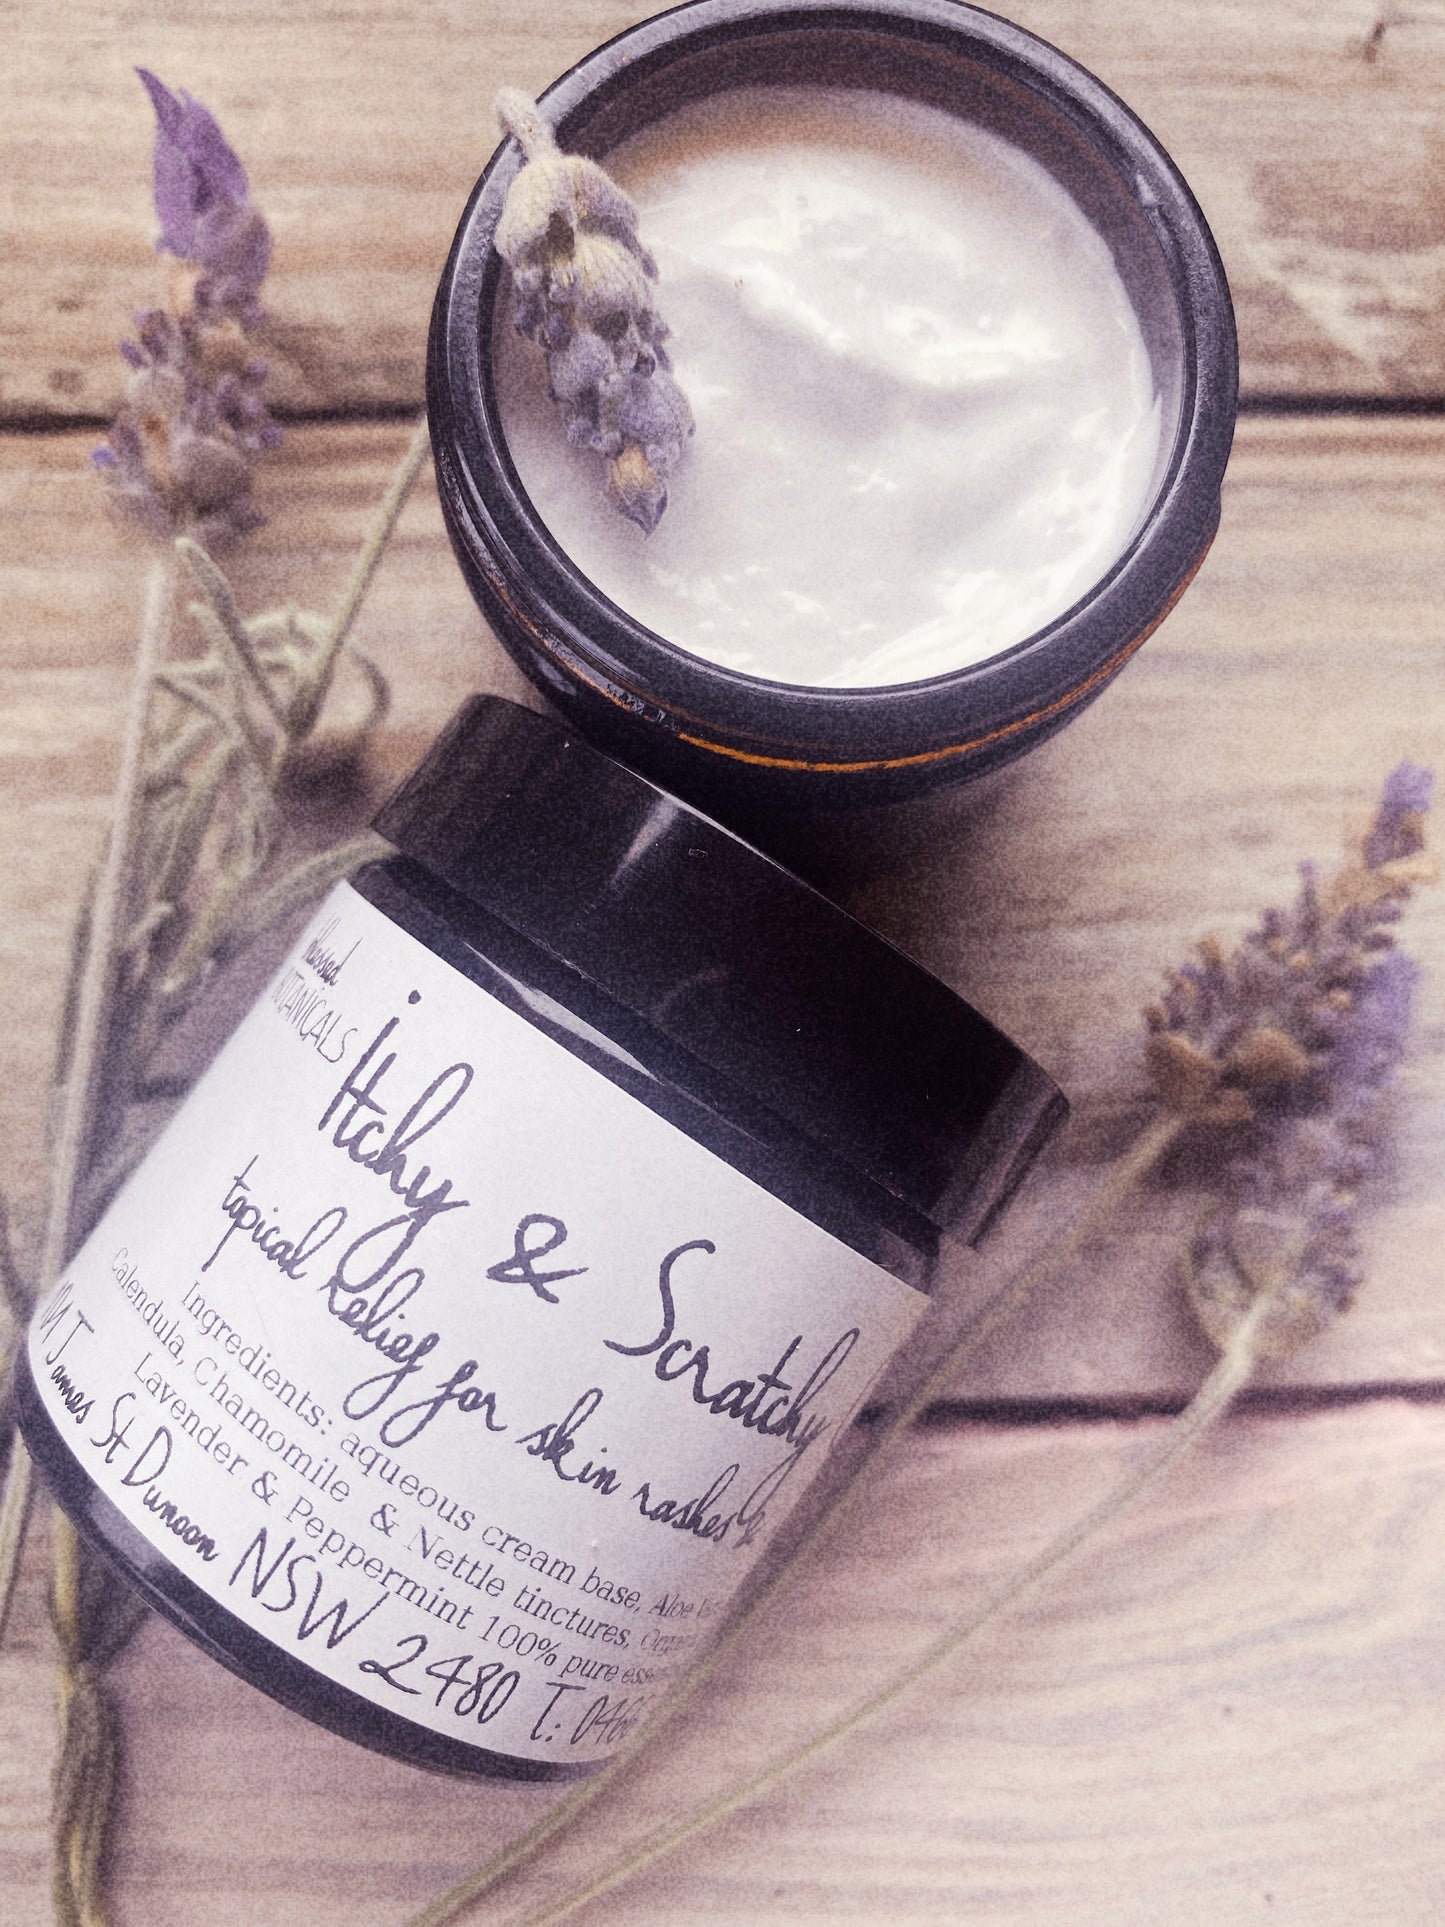 Itchy scratchy topical cream, soothing blend of herbs flowers oils, calming eczema, bites, rashes, skin irritations, Aloe Vera gel, Calendula, Nettle Leaf herbal tinctures, Organic Rosehip oil, chamomile, 100% Pure Essential Oils, Peppermint essential oil, Lavender essential oil, Australian Bush Flower essences, Ausflowers, topical anti-itch cream, hand made with love, hand crafted, artisan, artisinal, qualified herbalist, fiona gray herbalist, blessed botanicals apothecary.